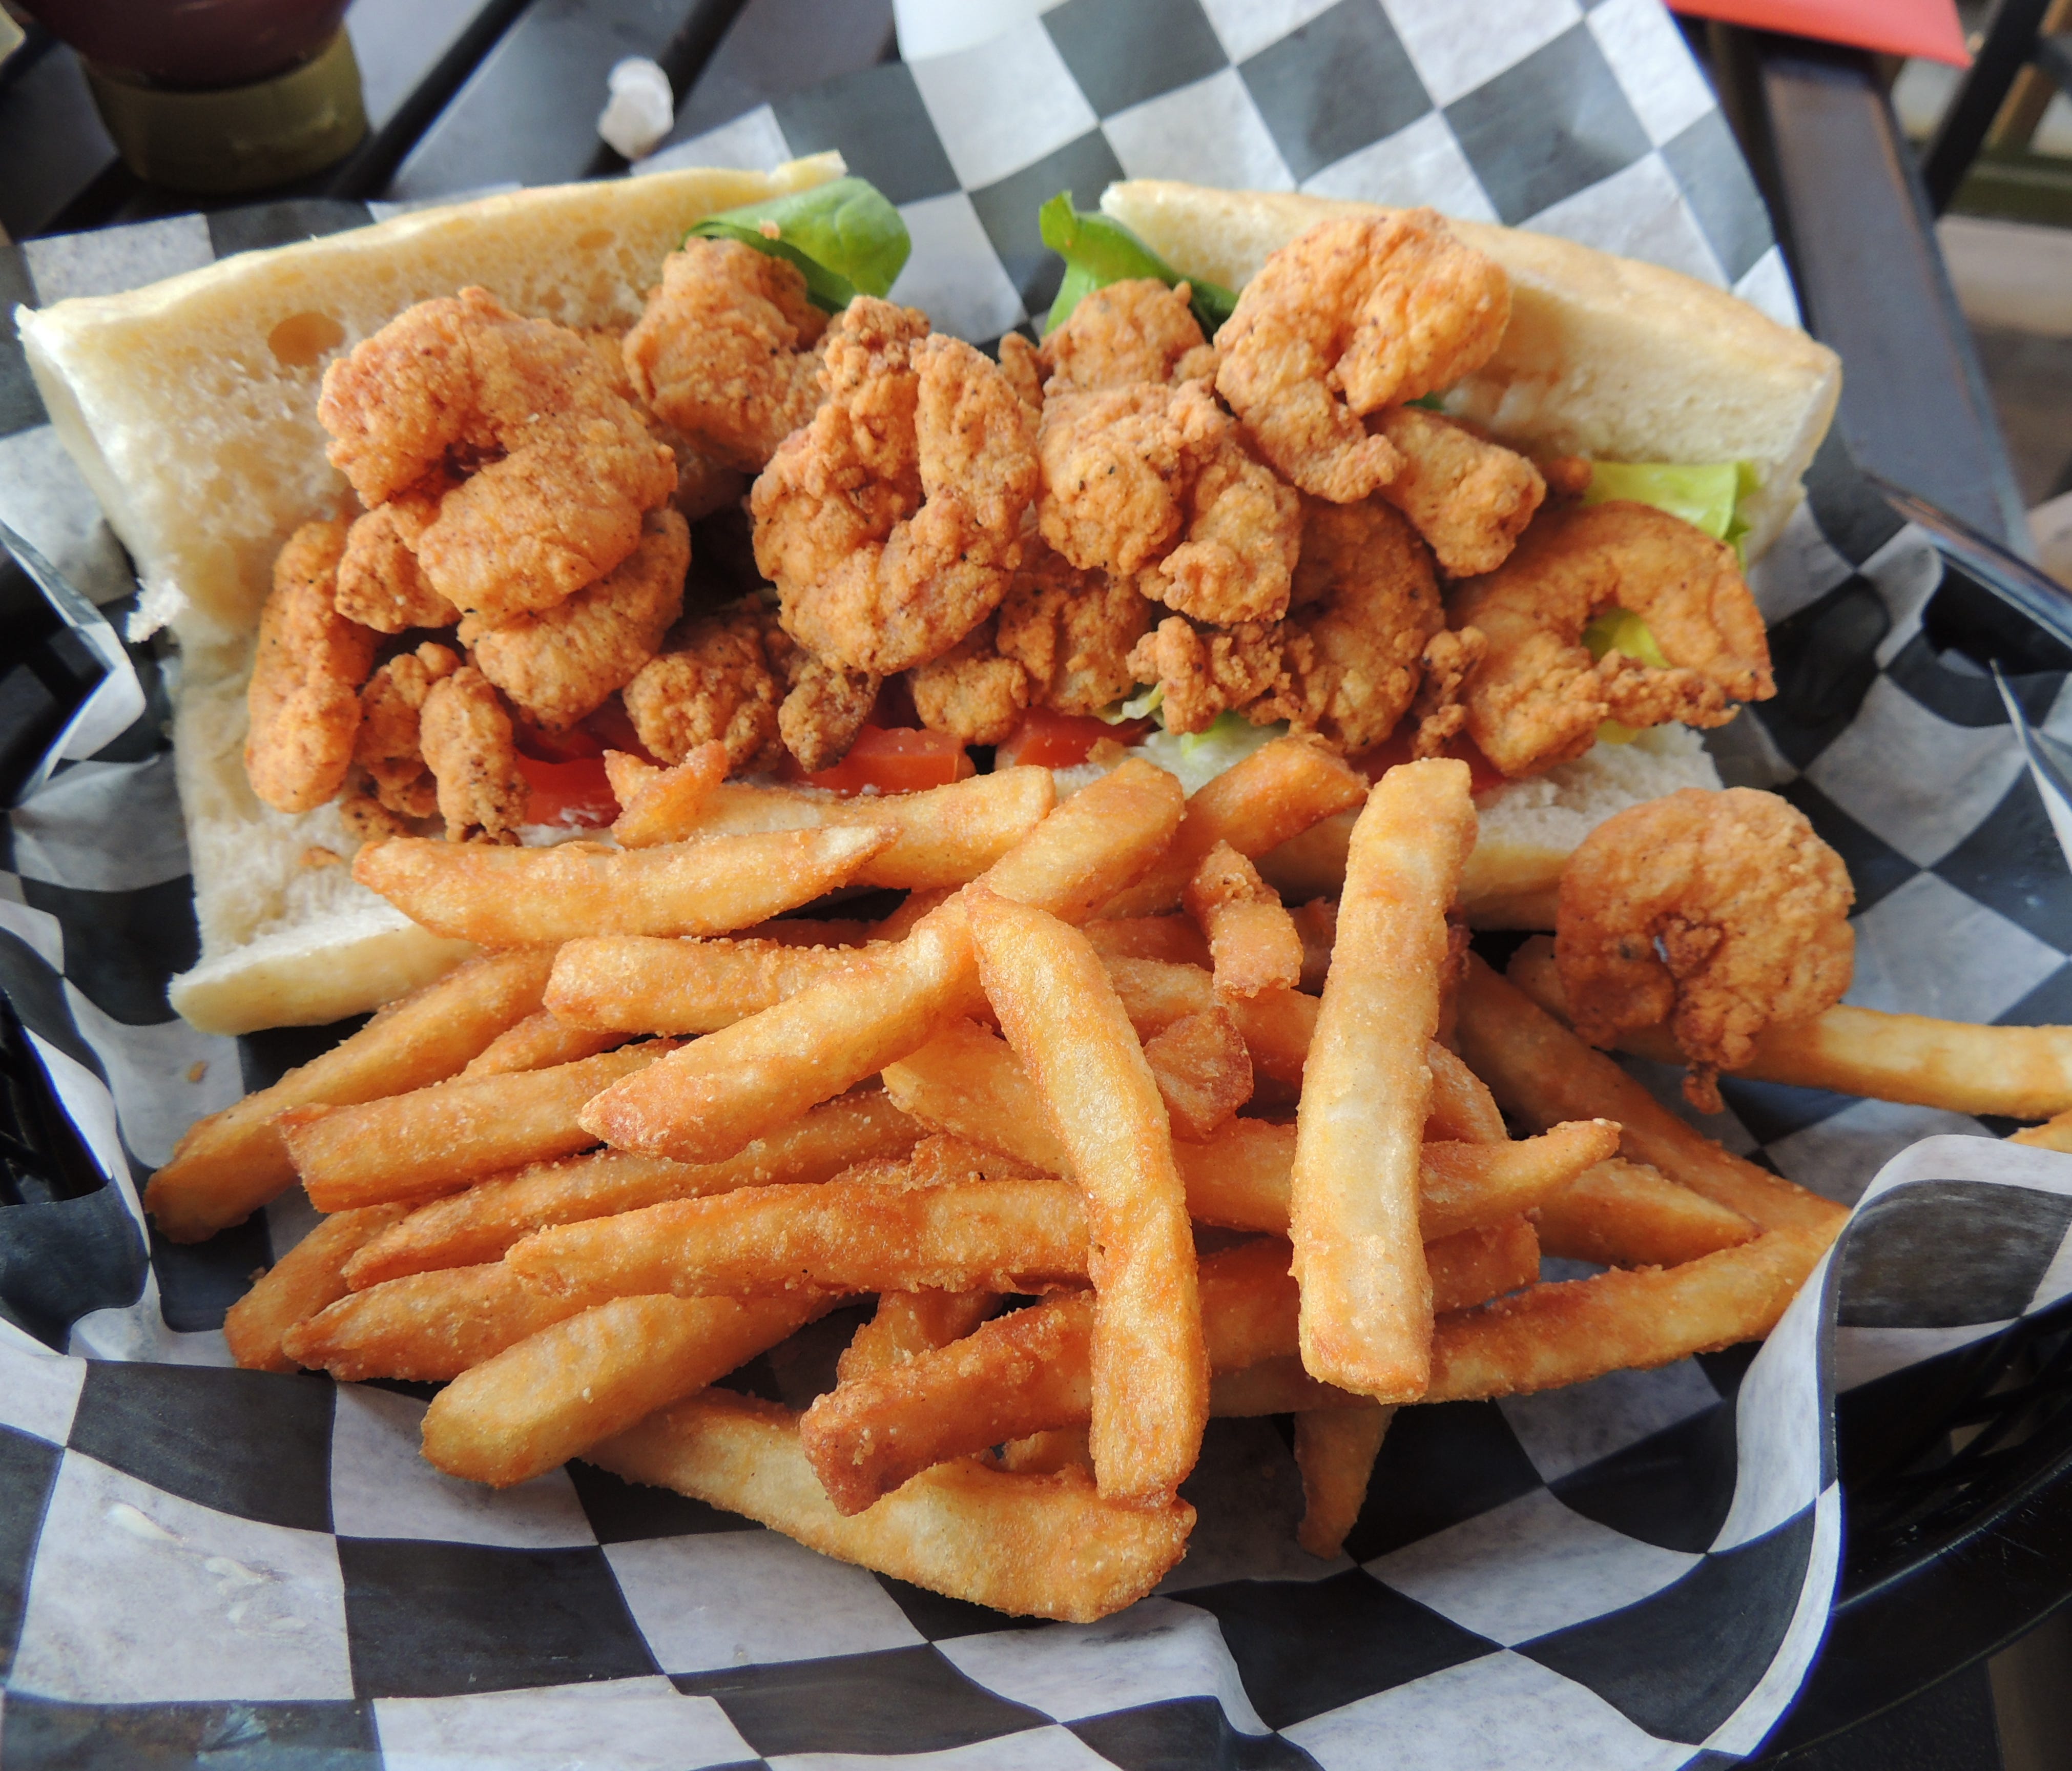 One of the perennial bestsellers at Rosetti's is the wild Gulf shrimp po' boy, served on bread baked in house with perfectly cooked fries.